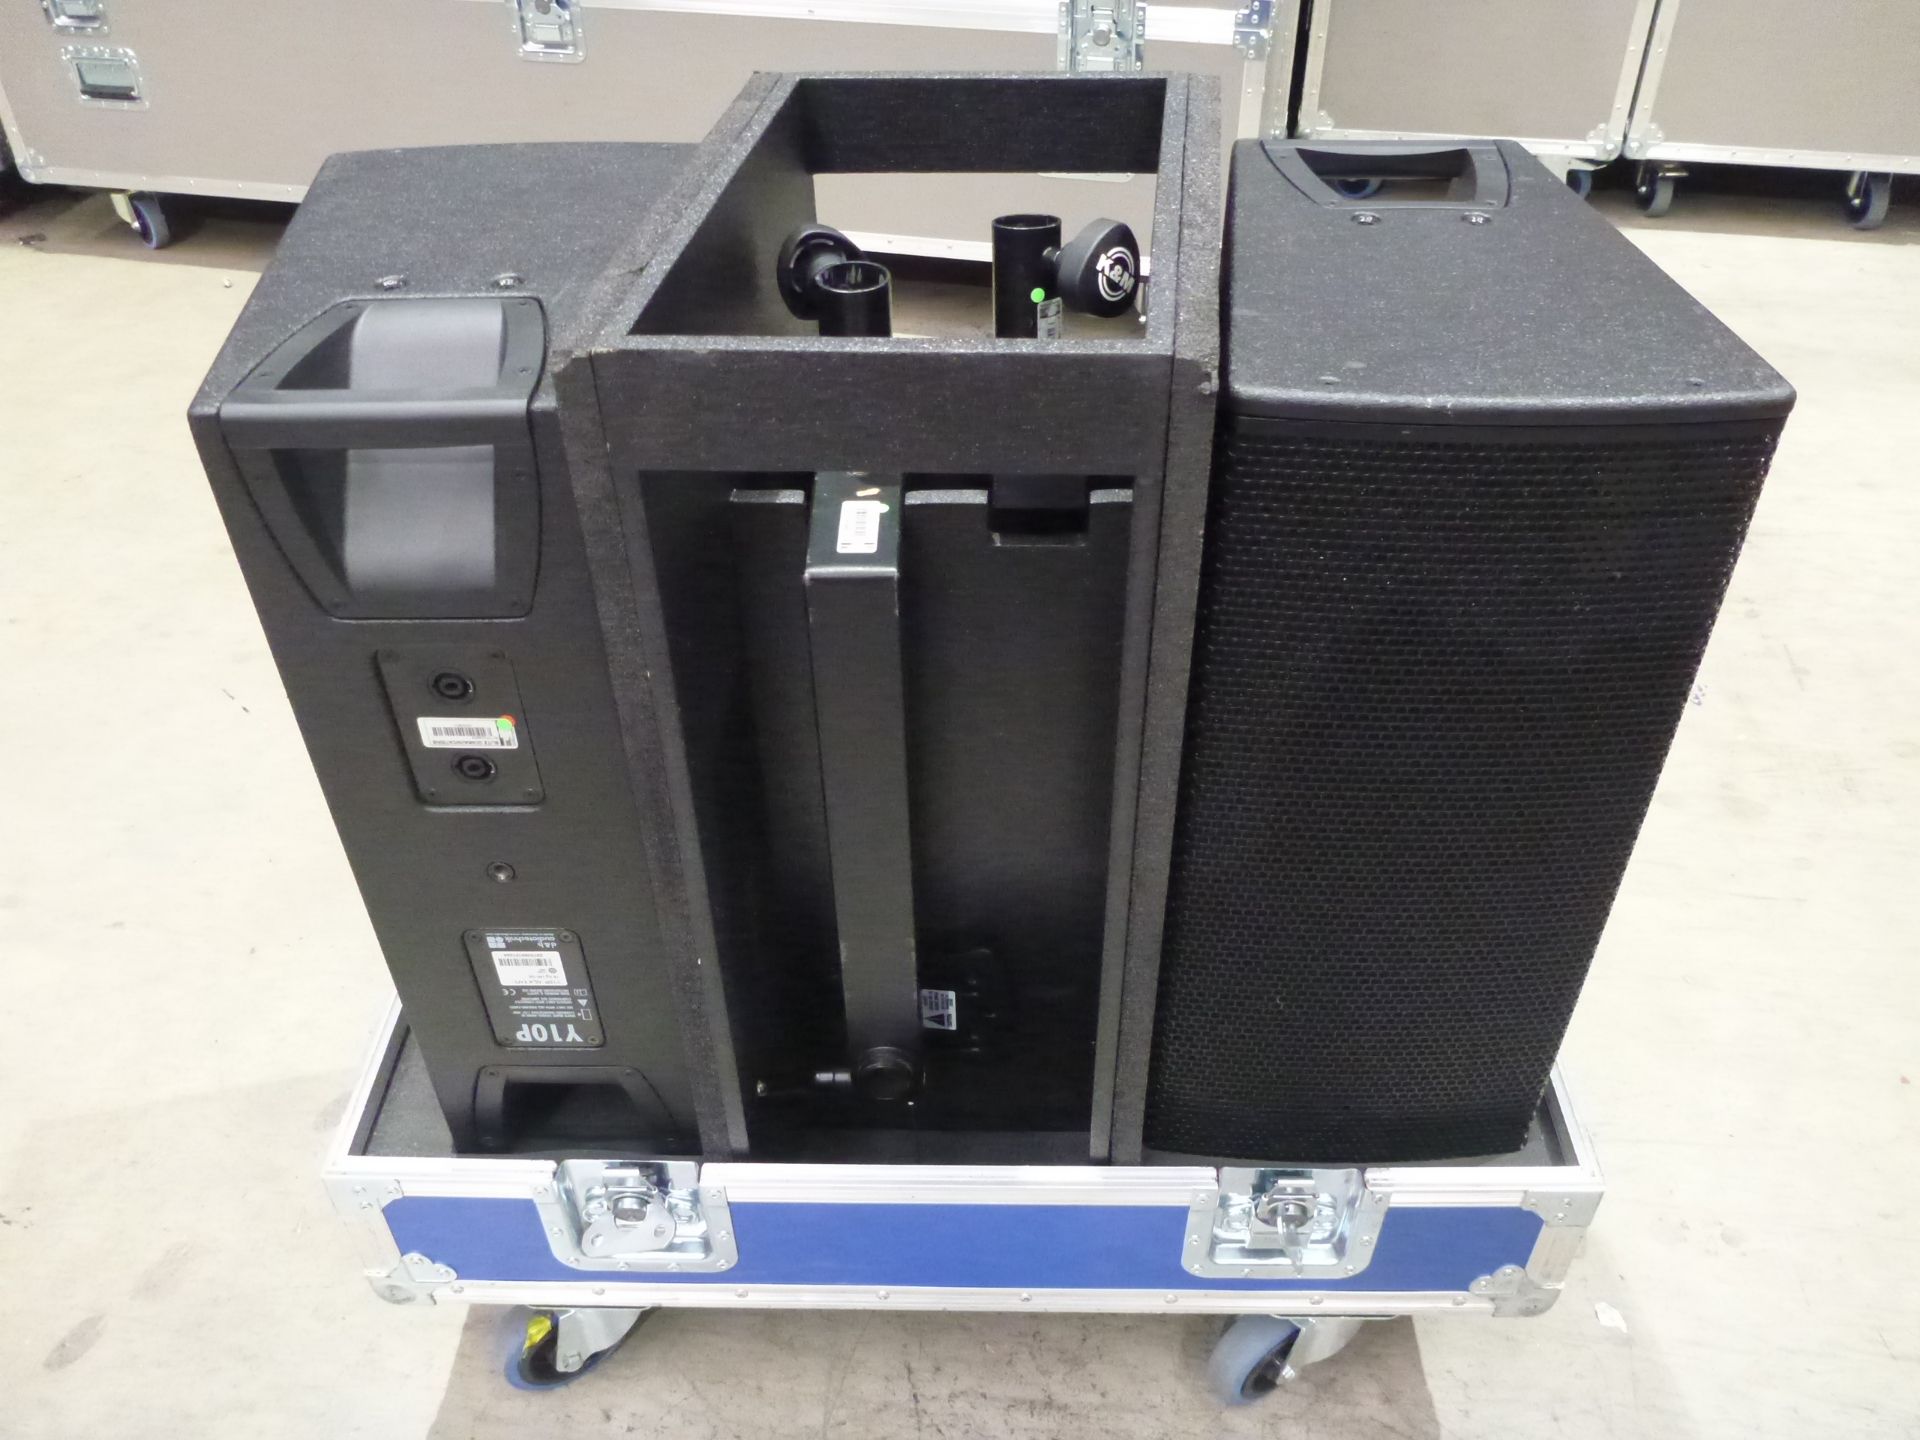 D & B Audiotecknik Y10P Loudspeakers (Pair) In flight case with flying frame, top hat and safety